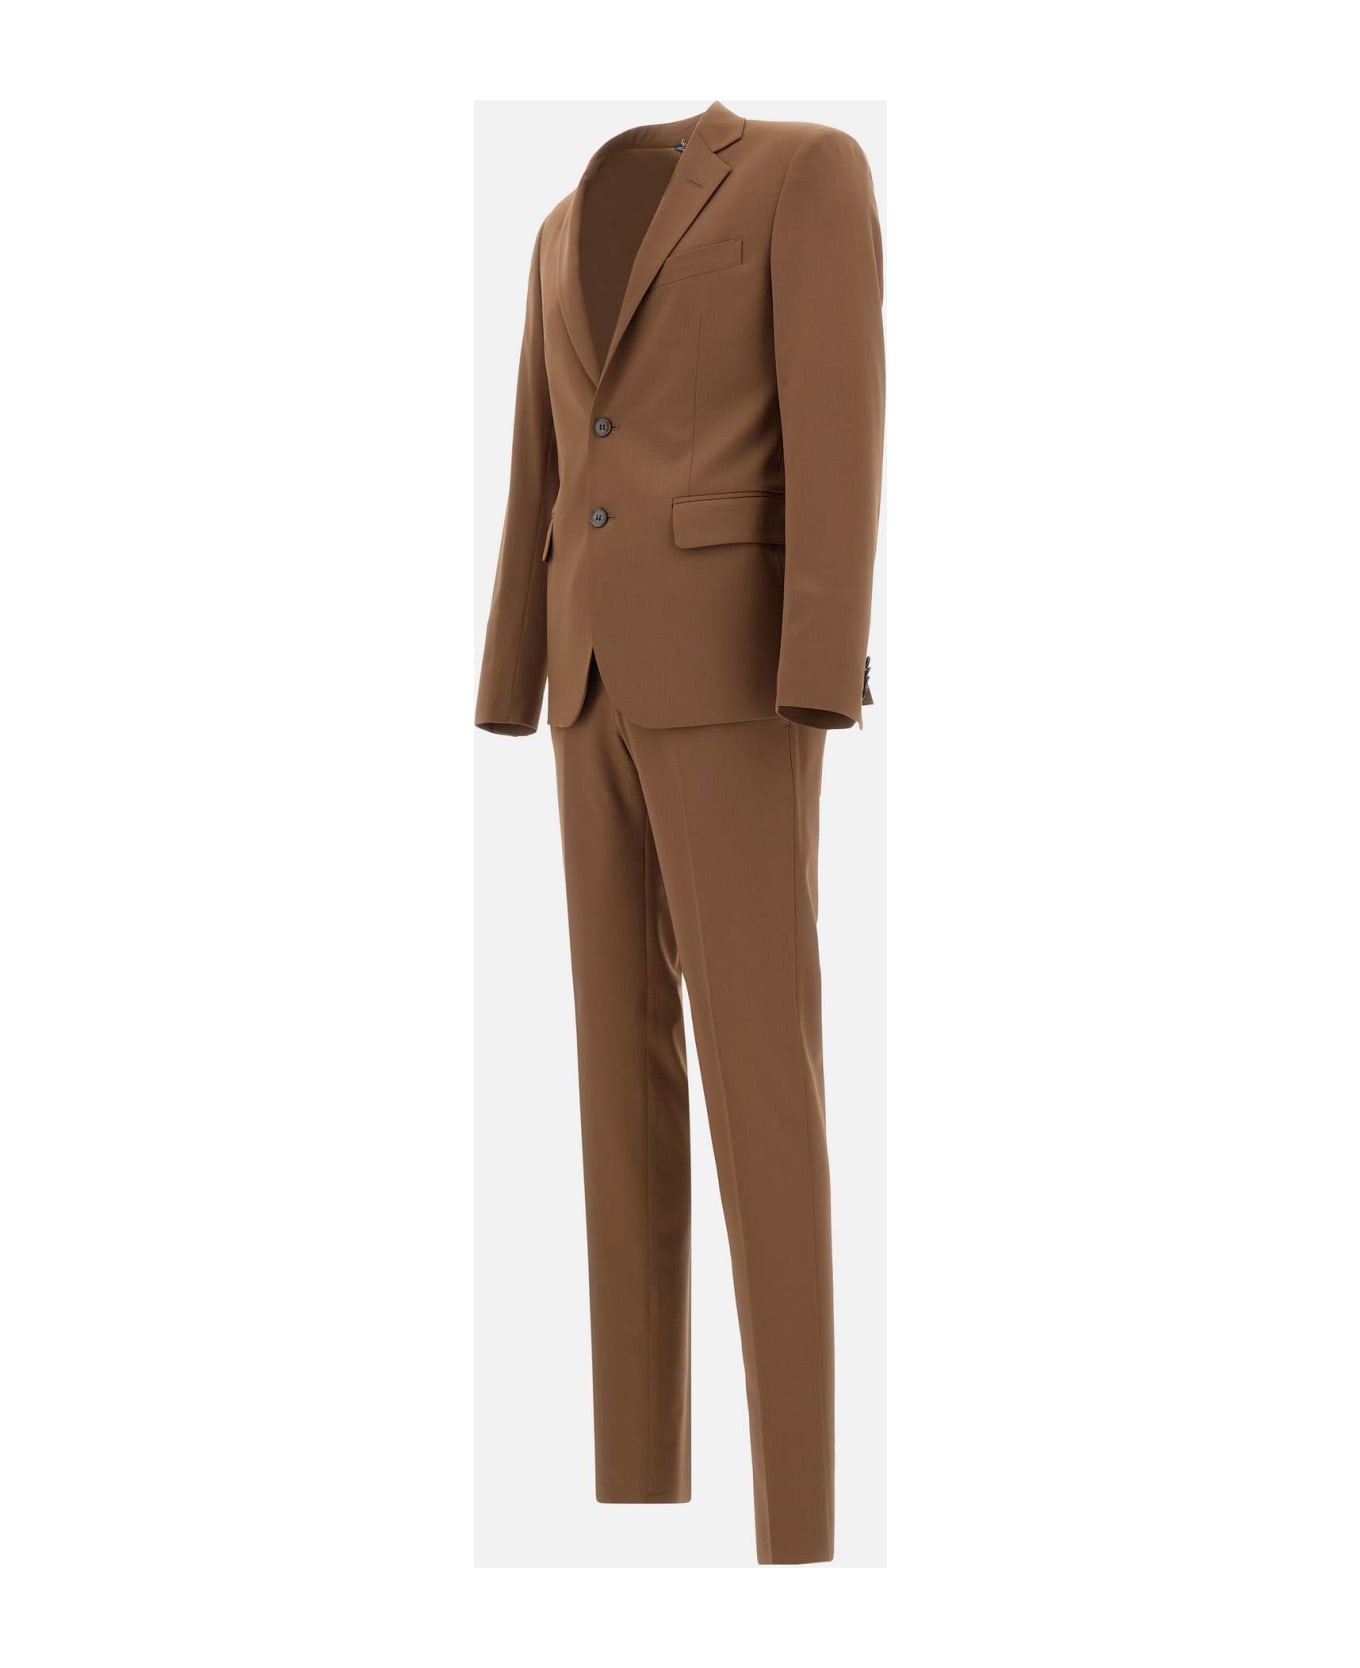 Brian Dales "ga87" Suit Two-piece Cool Wool - BROWN